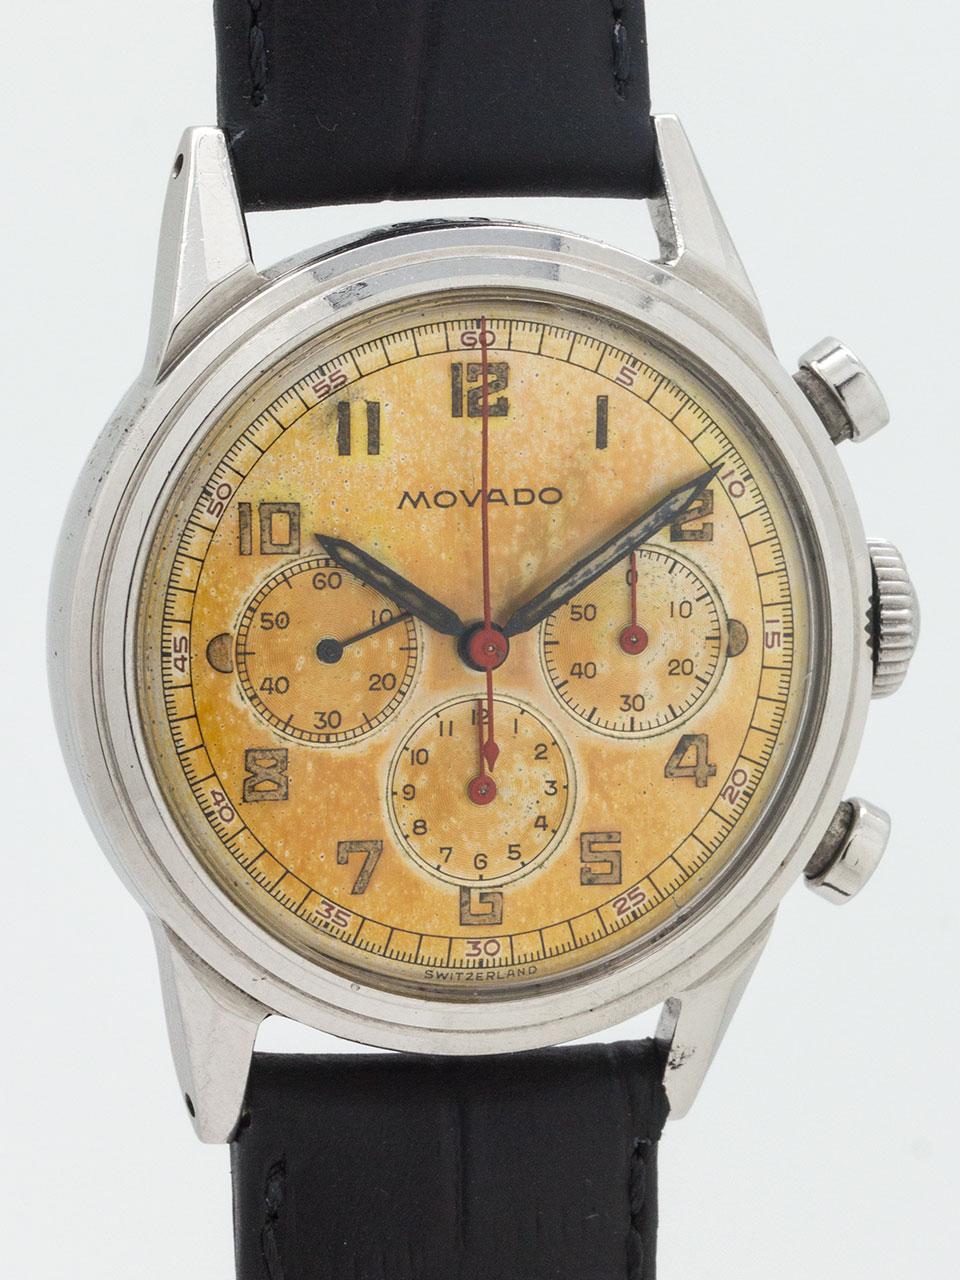 
Vintage Movado chronograph circa 1950’s featuring 34.5mm diameter case, faceted and tapered lugs, round chronograph pushers, original mushroom style Movado crown, and with richly patina’d straw colored original dial with aged luminous indexes, red